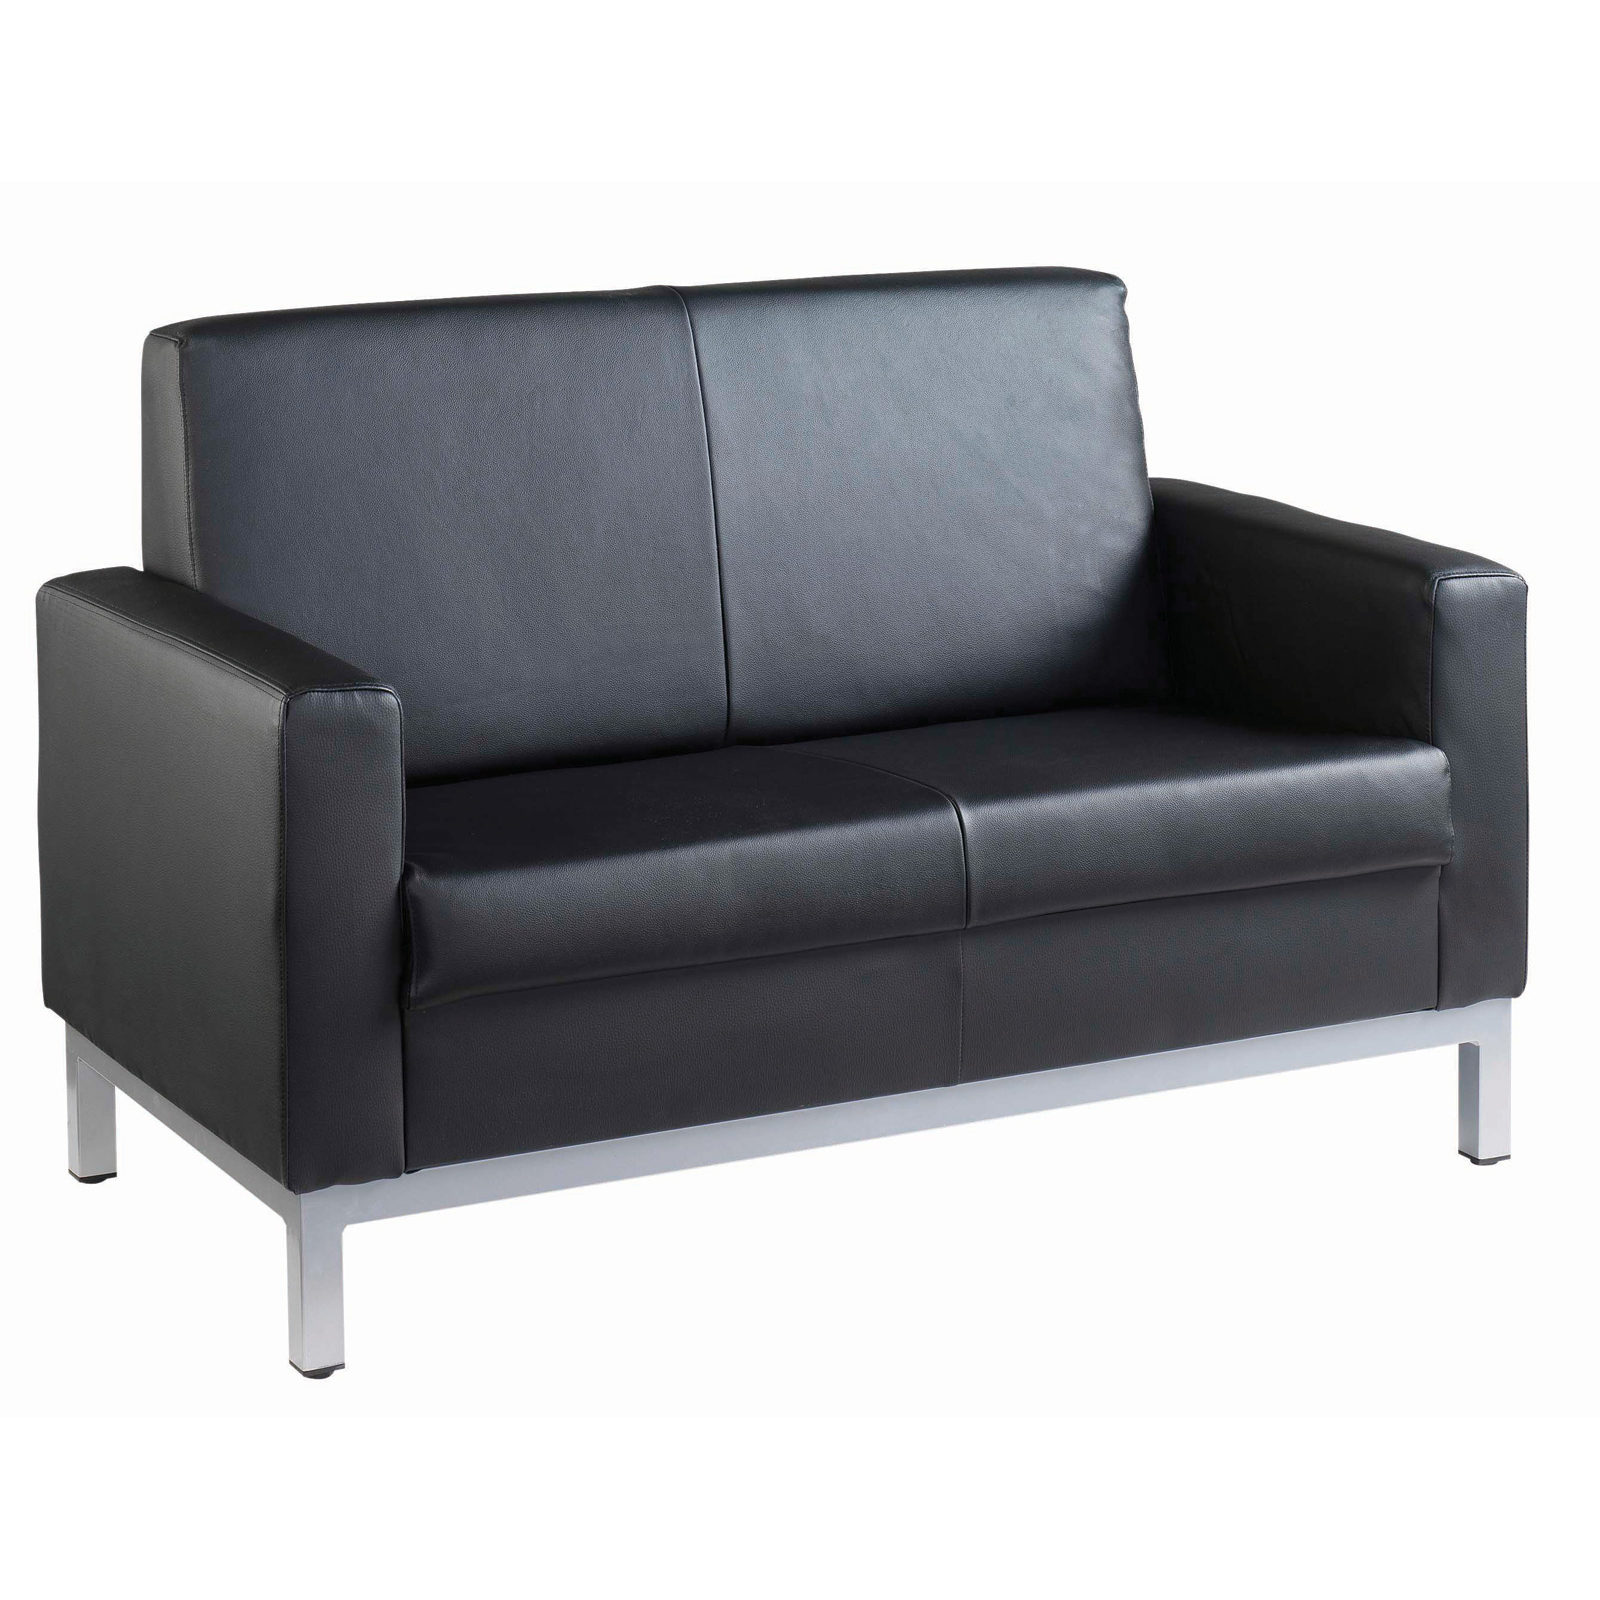 Reception Chairs Helsinki square back reception 2 seater chair 1340mm wide - black leather faced